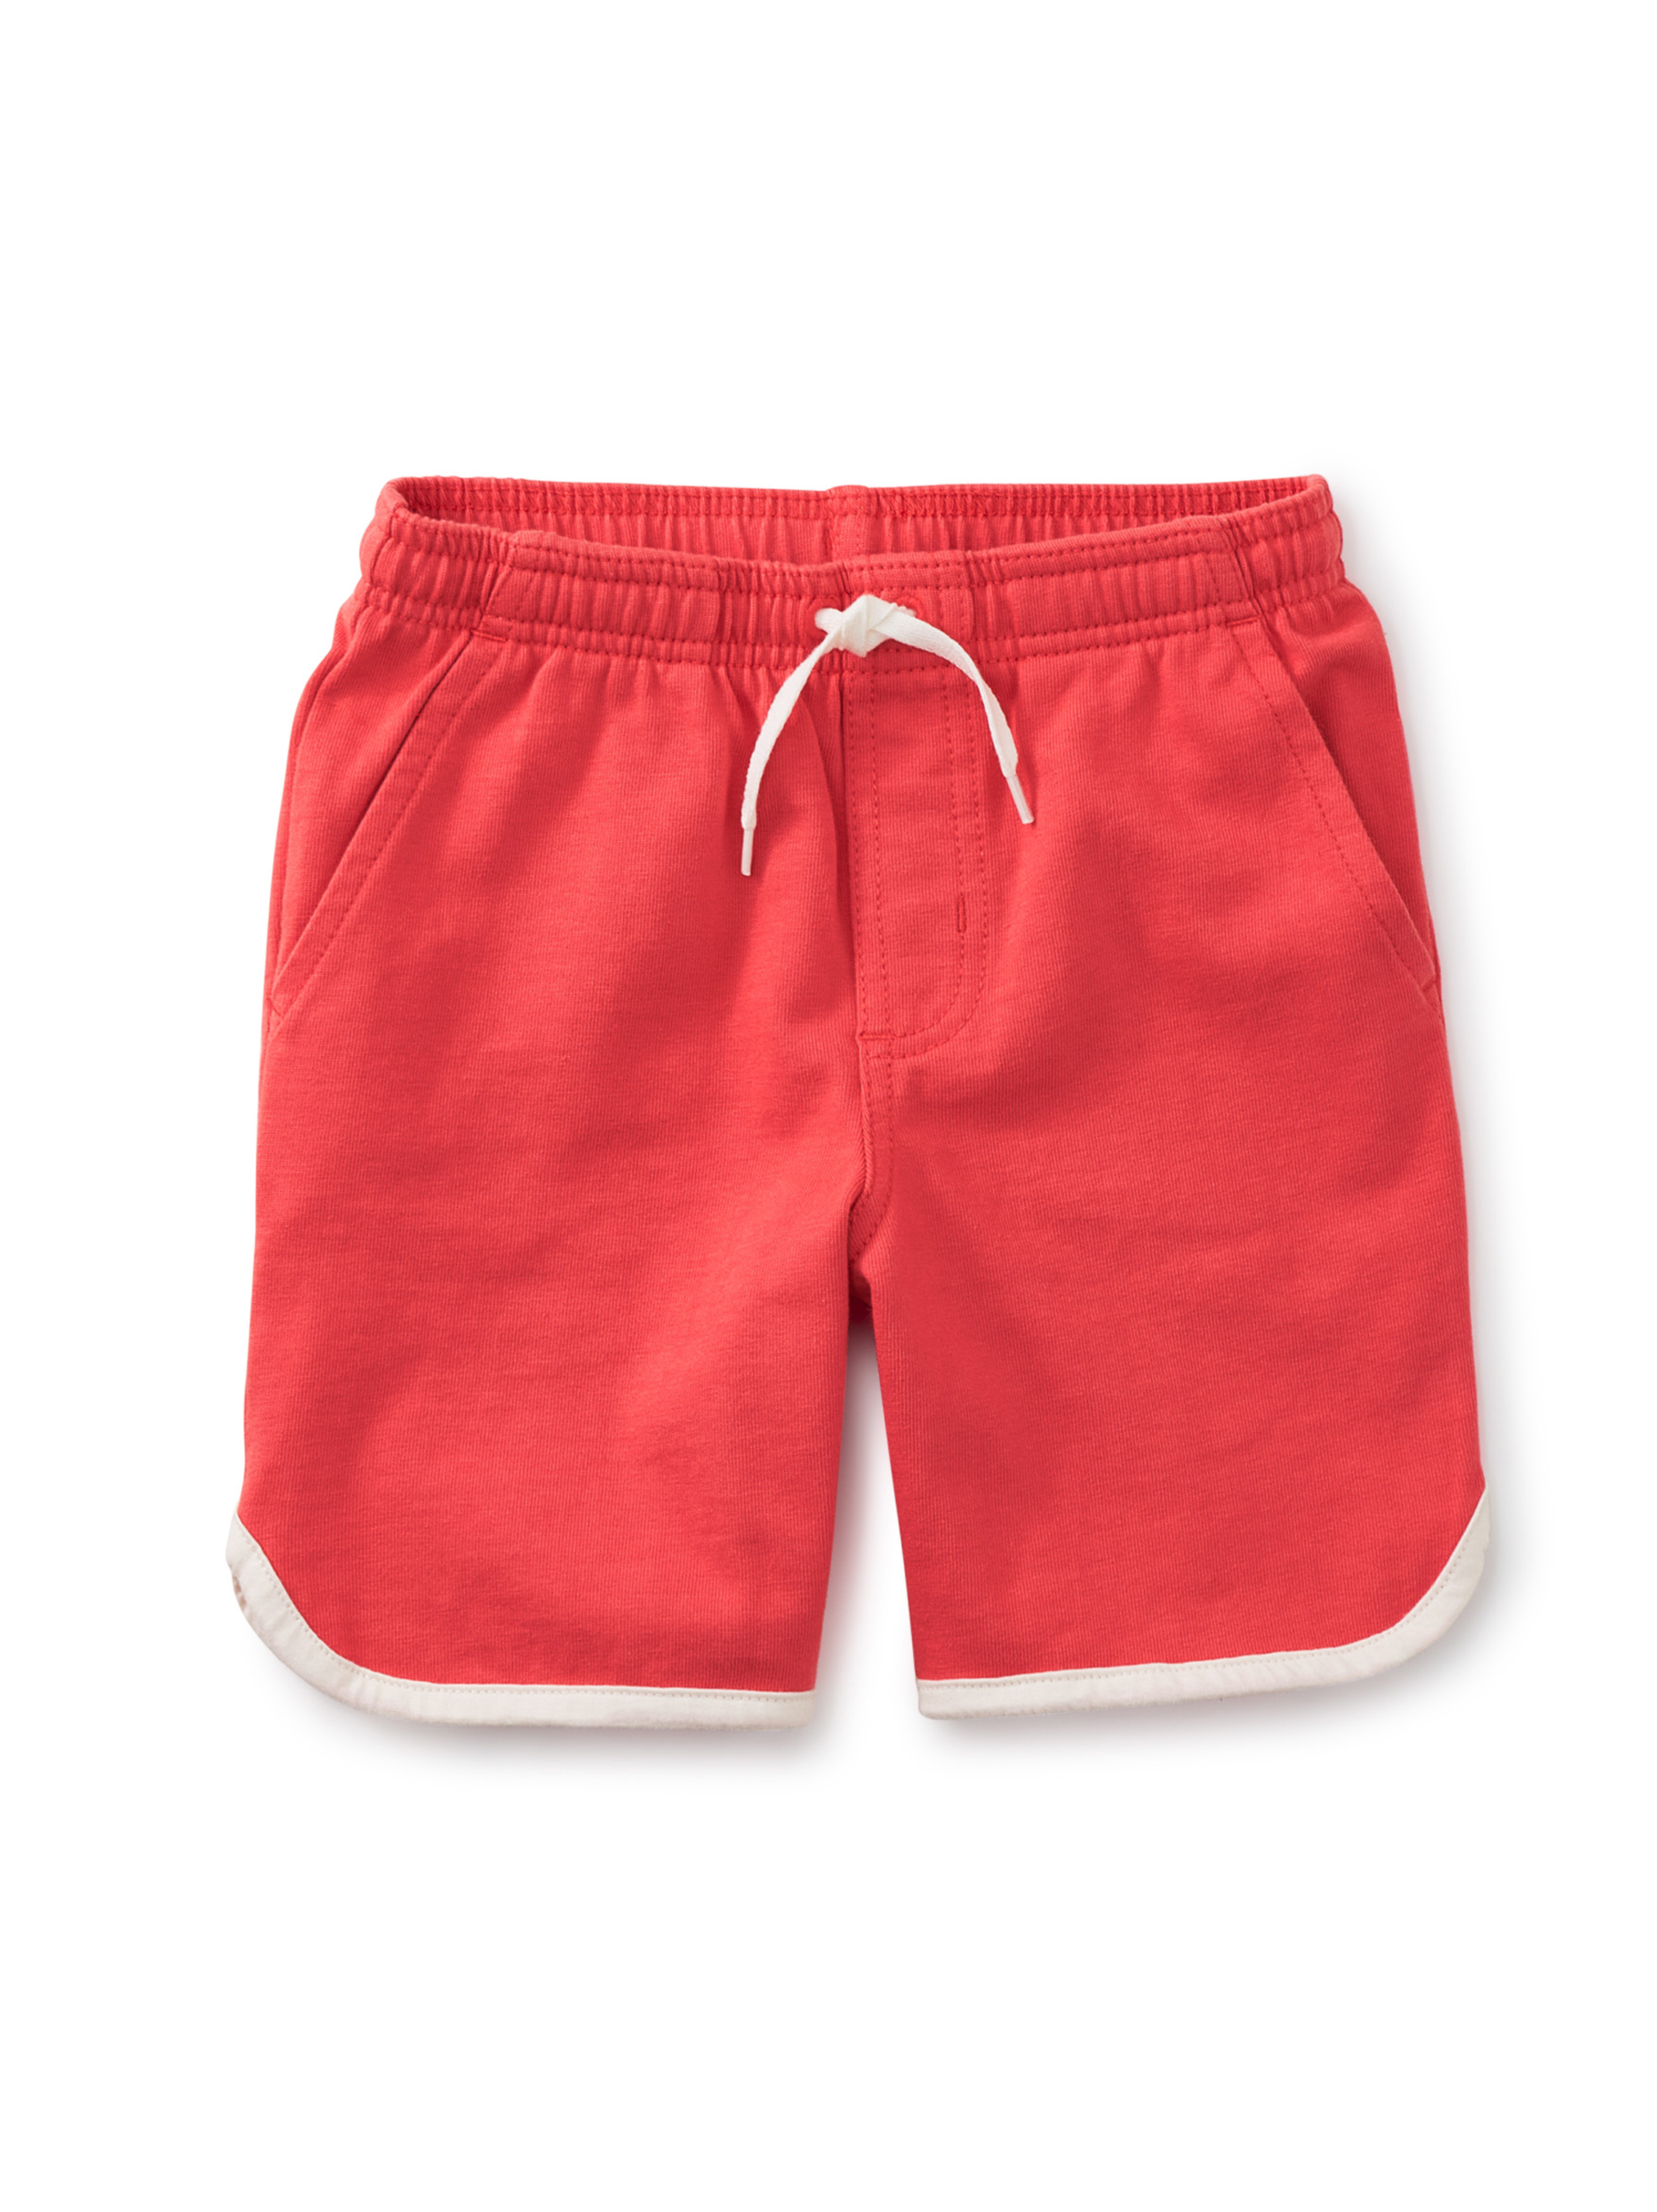 Ringer Shorts | Tea Collection